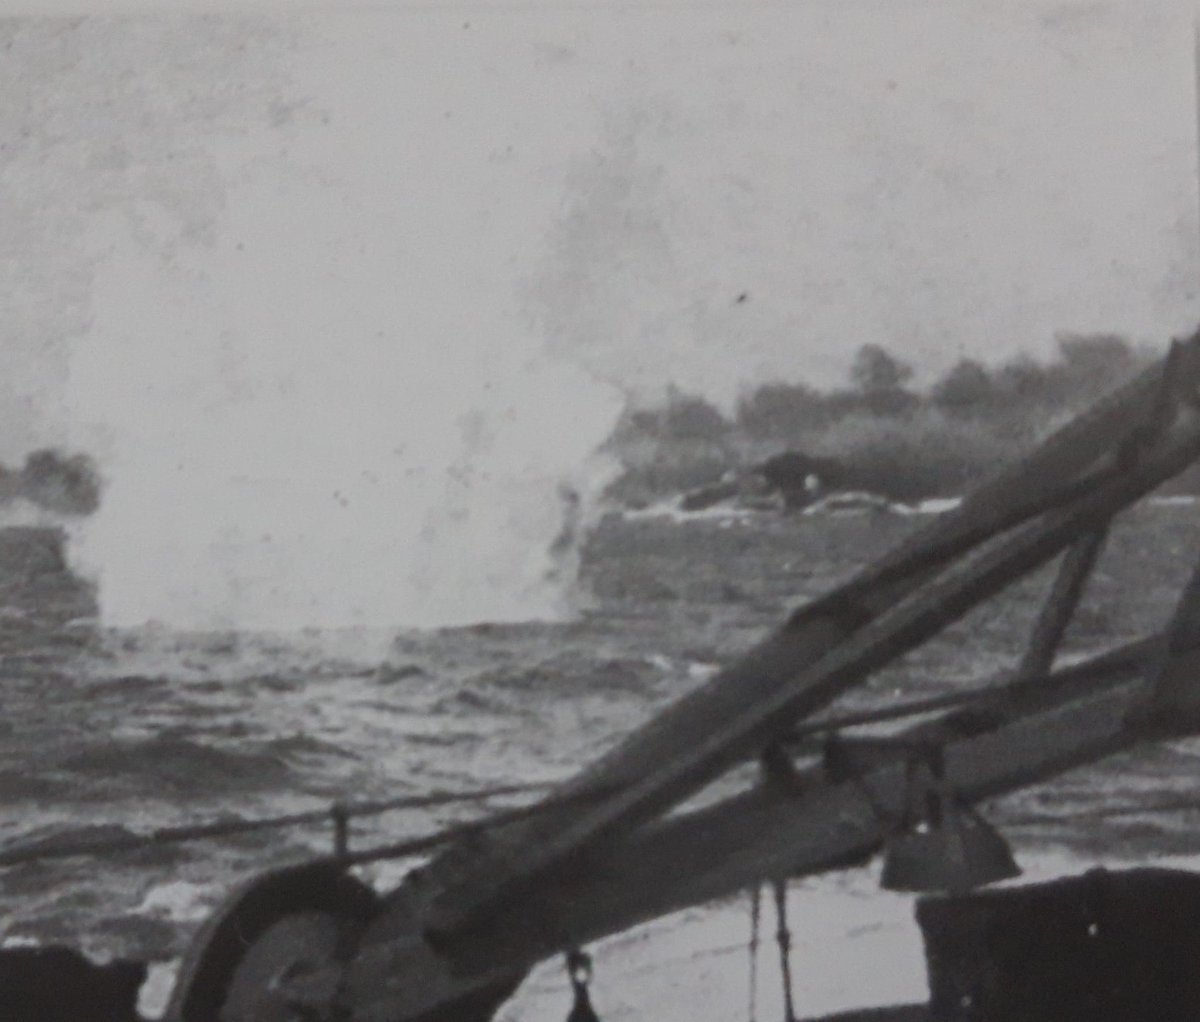 The British cruiser HMS Gloucester under fire of 15 inch shells of the Italian BB Vittorio Veneto during the battle of Cape Matapan in March 1941. Pics taken from HMAS Perth.